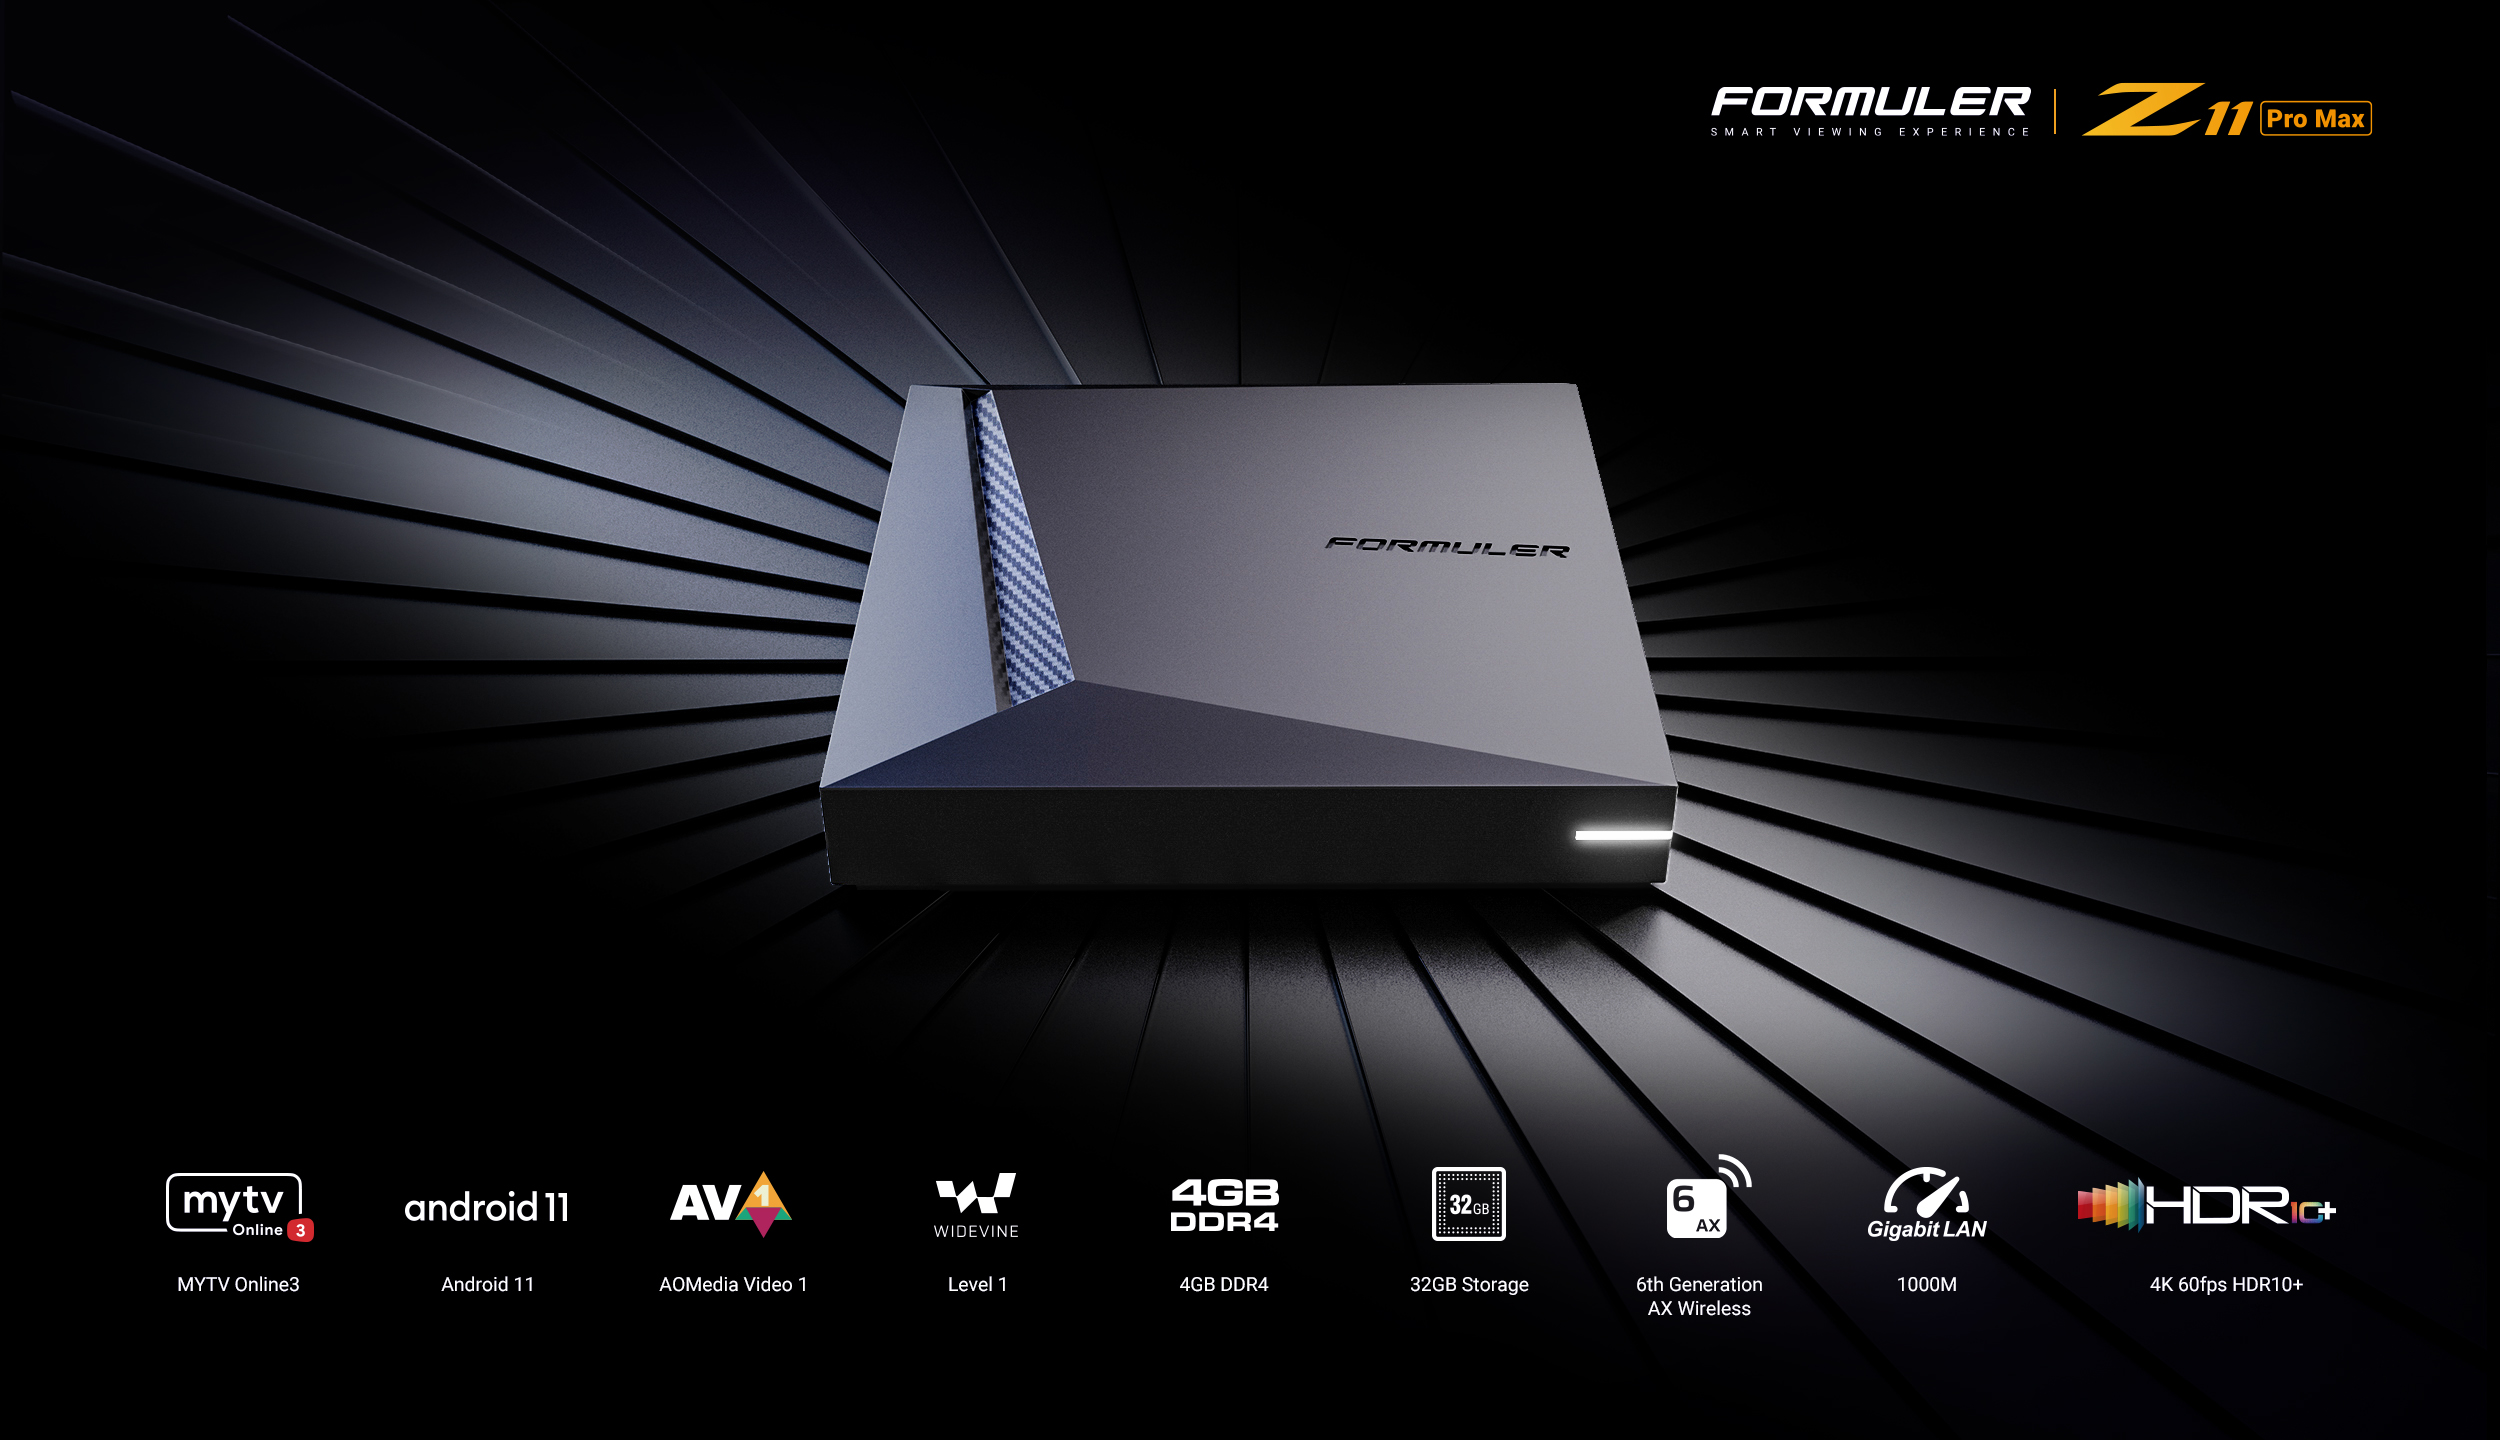 Introducing Formuler Z11 Pro MAX, Z11 Pro and MOL3 - Formuler Z11 Pro Max, Z11  Pro - Formuler-Support Forum (English)